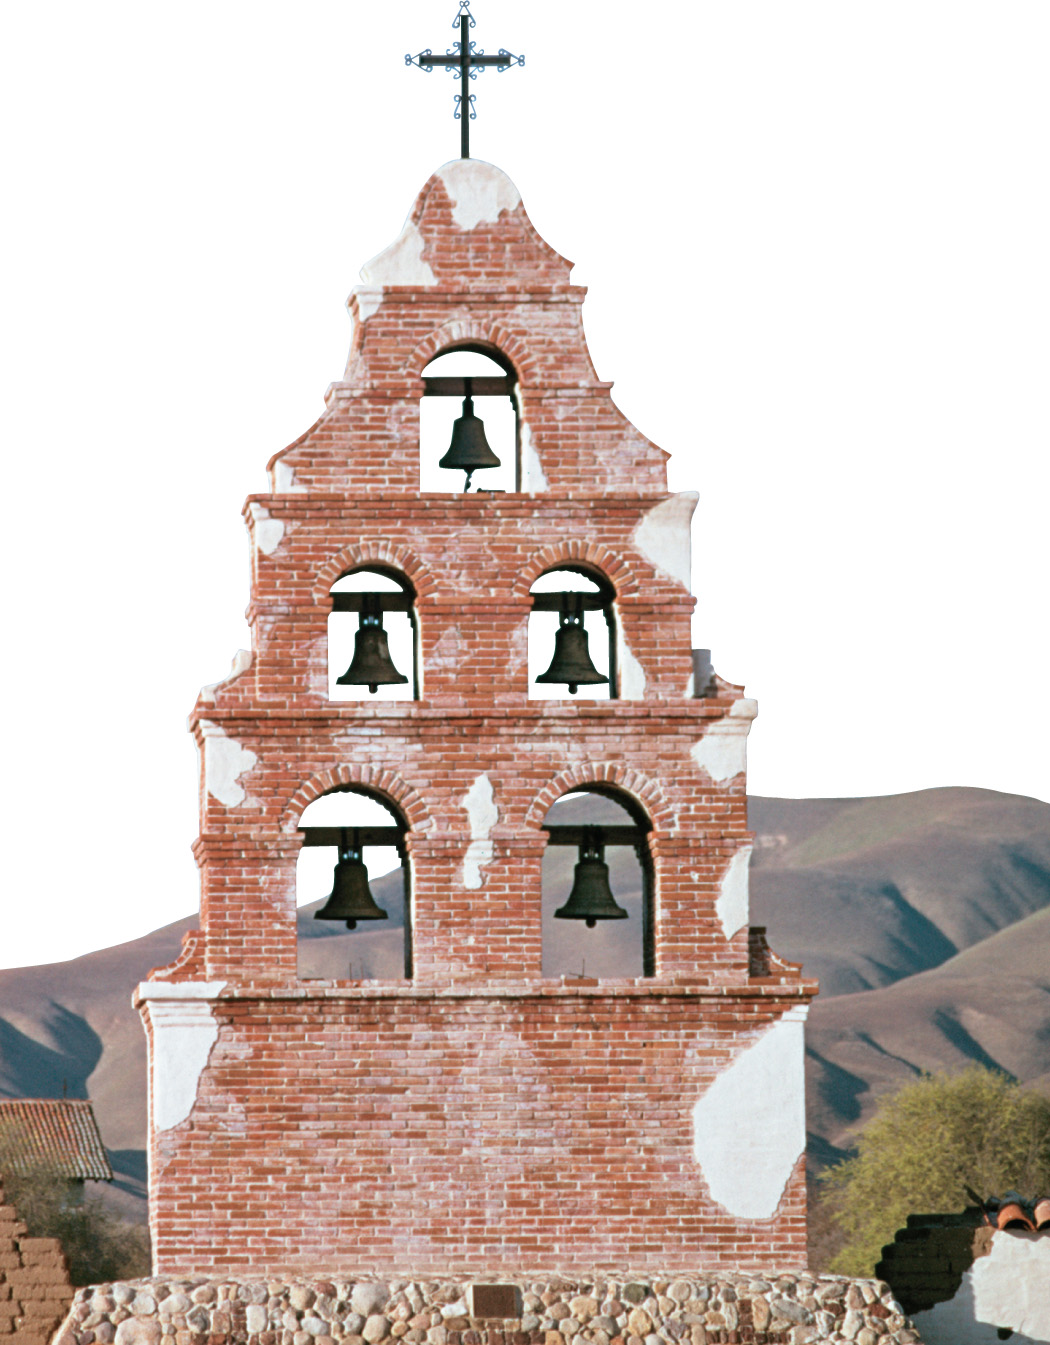 photo: a mission tower with 5 bells and a cross on top.